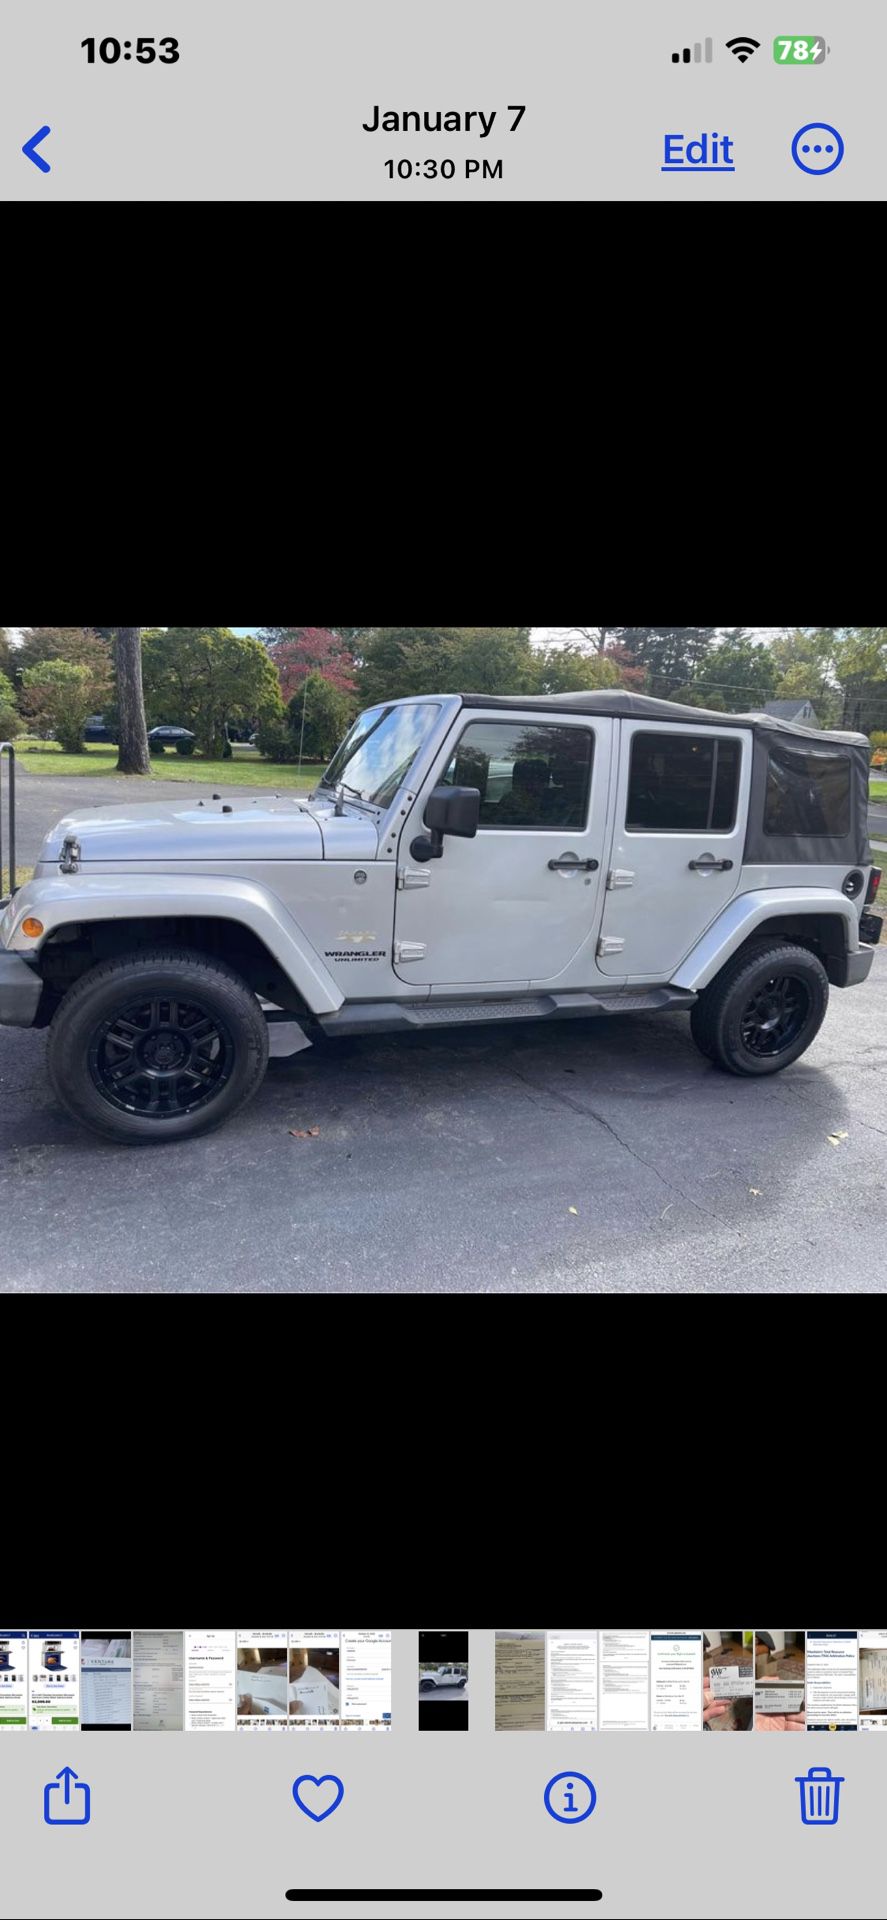 2008 Jeep Wrangler for Sale in Norwalk, CT - OfferUp